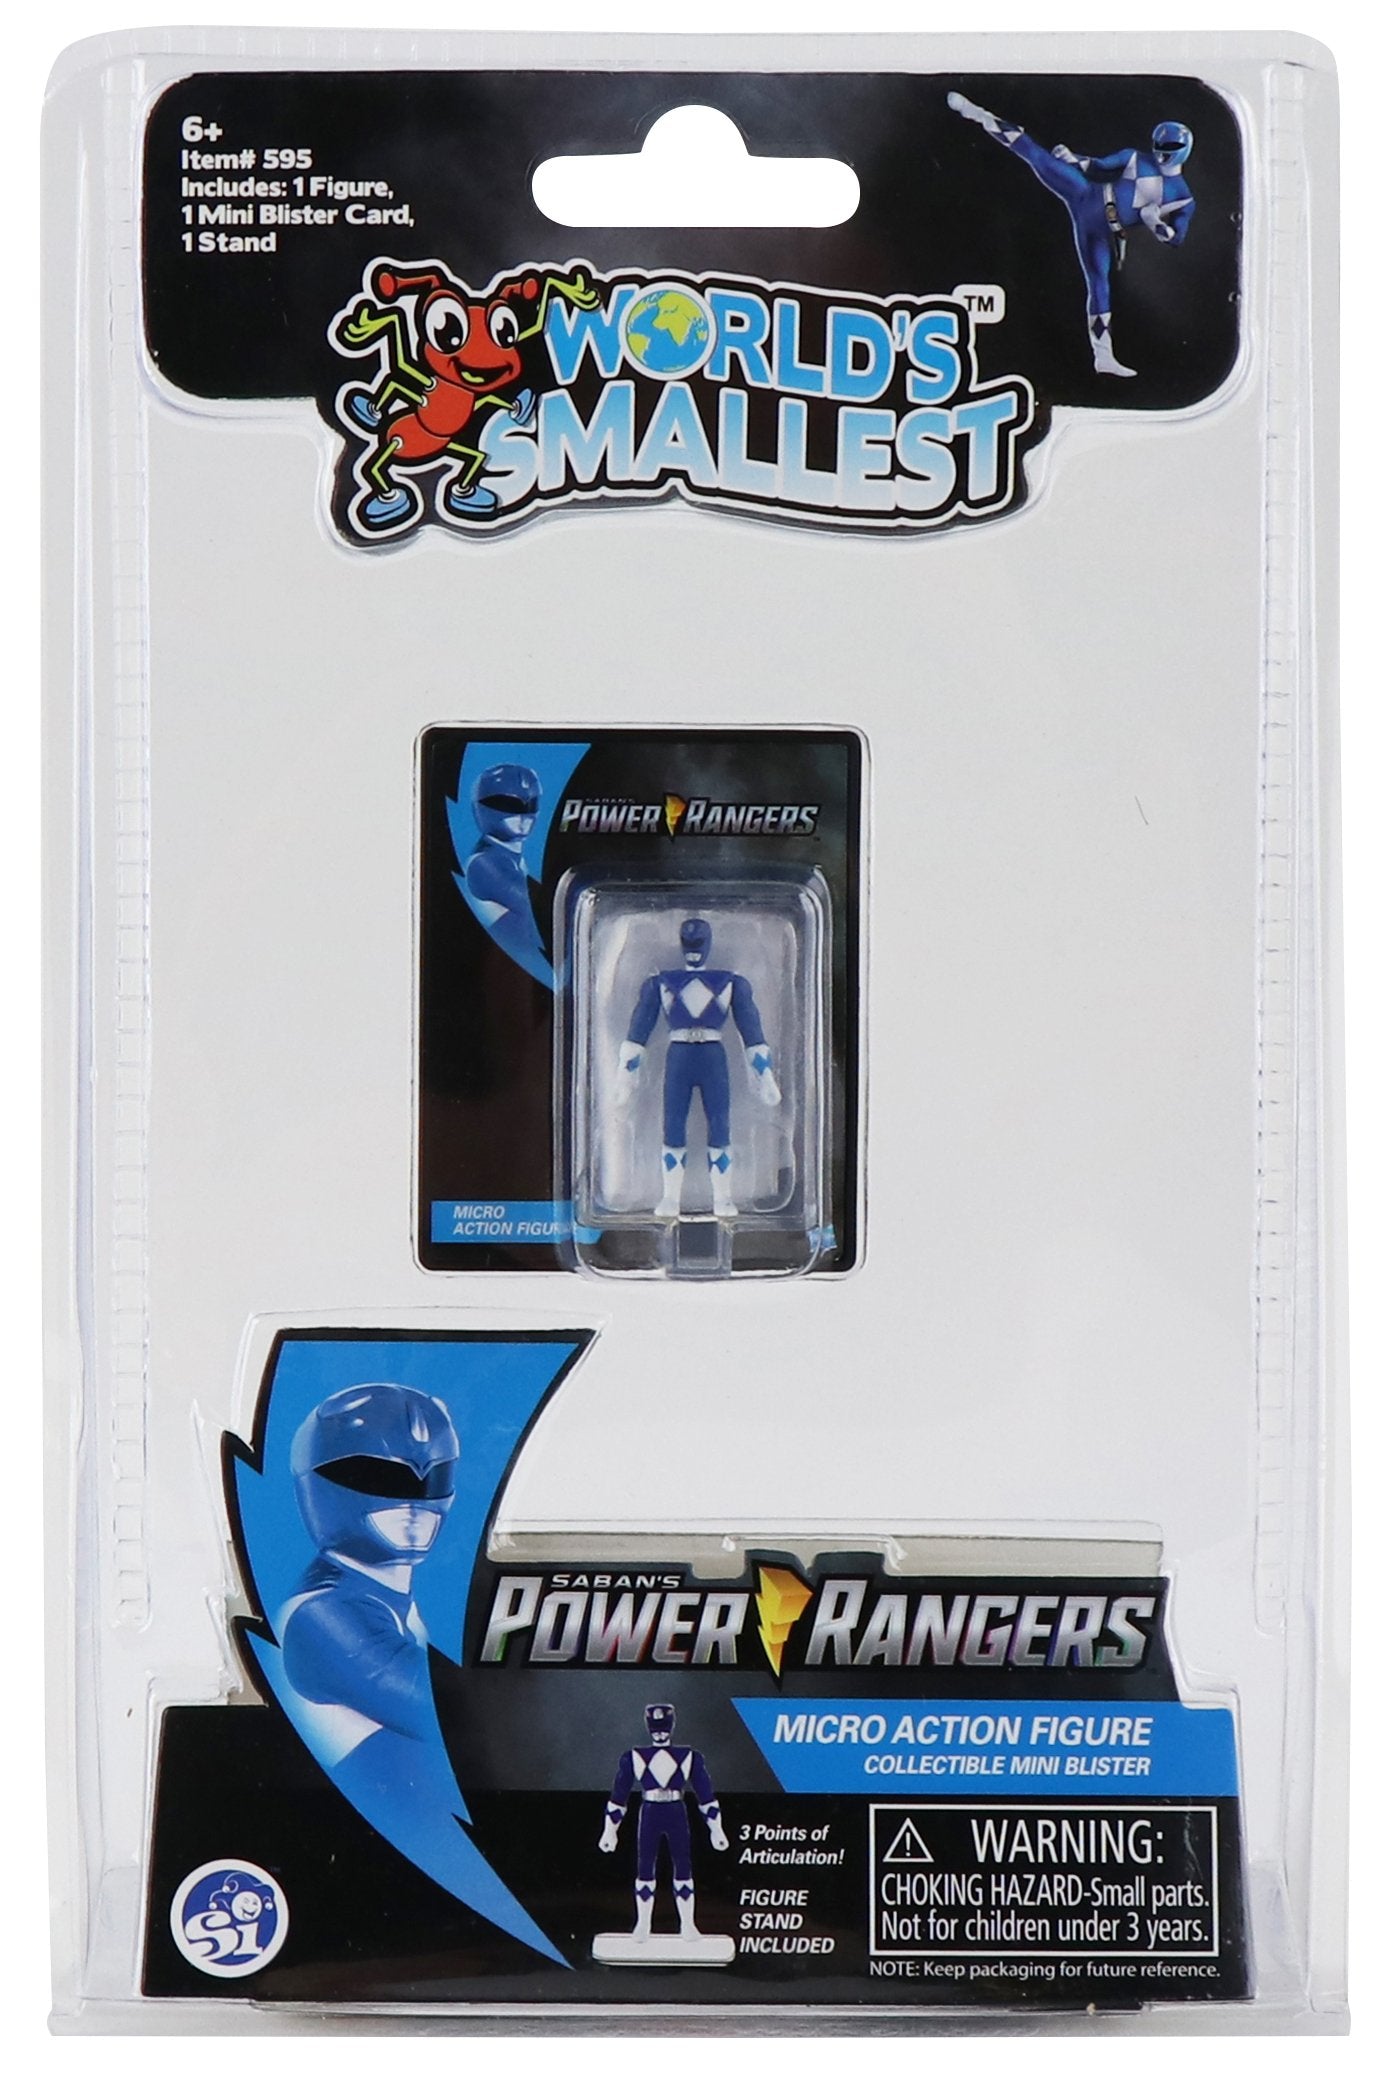 World's Smallest Power Rangers Set of 6 Micro Action Figures - Zlc Collectibles